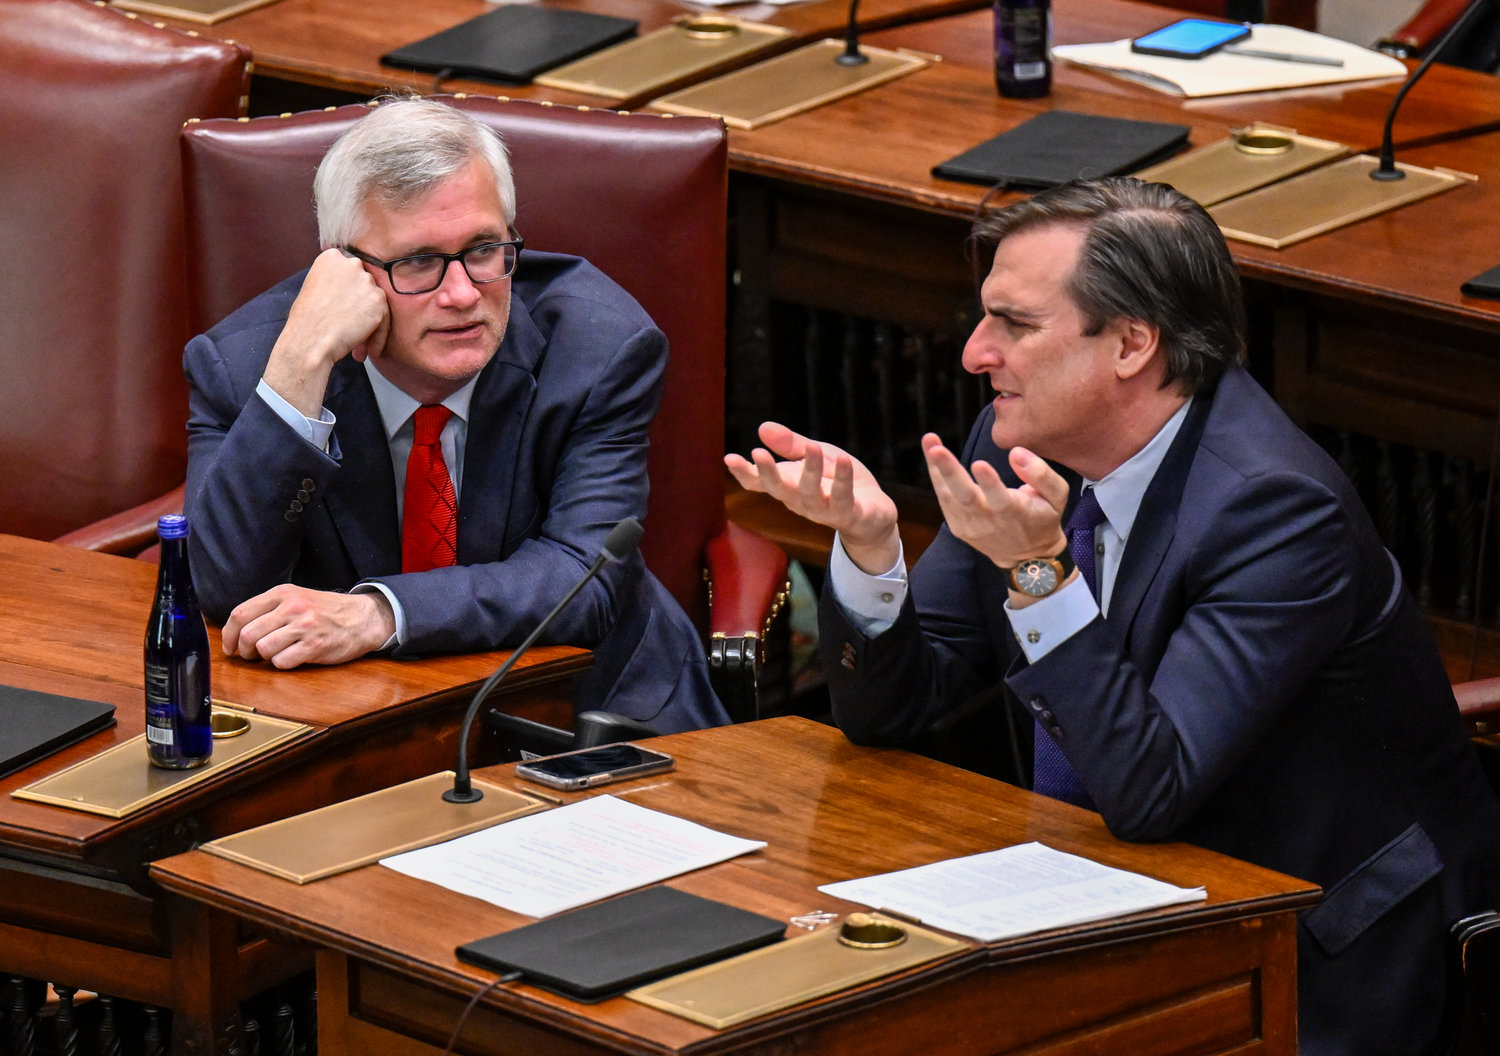 State Sen. Brian Kavanagh, D- New York, left, speaks with Senator Deputy Majority Leader, Michael Gianaris, D-Astoria, before a Senate session at the state Capitol on the last scheduled day of the 2022 legislative session, Thursday, June 2, 2022, in Albany, N.Y. (AP Photo/Hans Pennink)